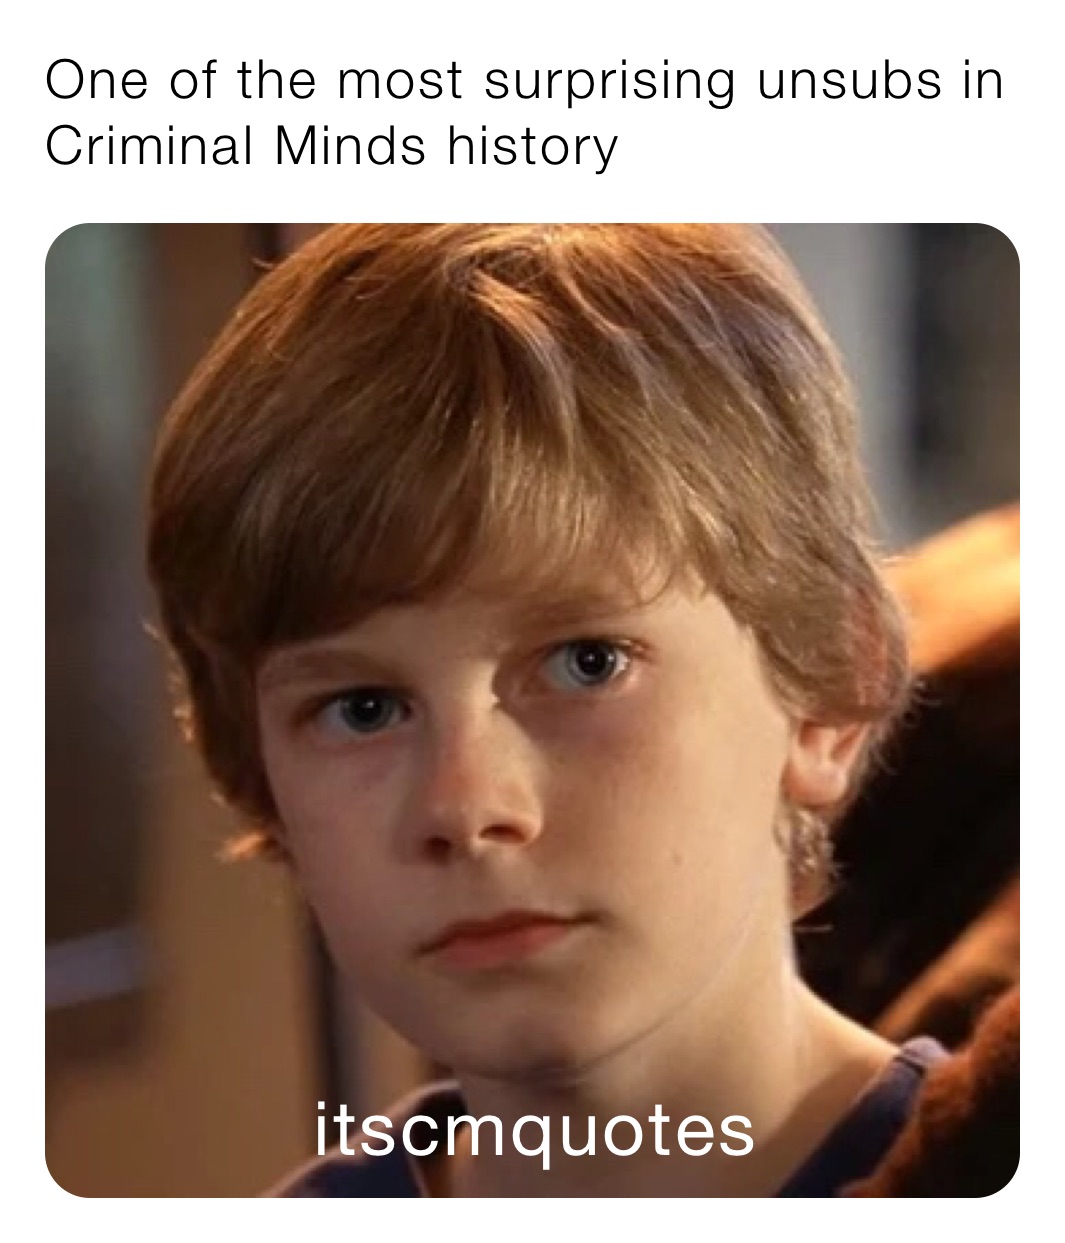 One of the most surprising unsubs in Criminal Minds history